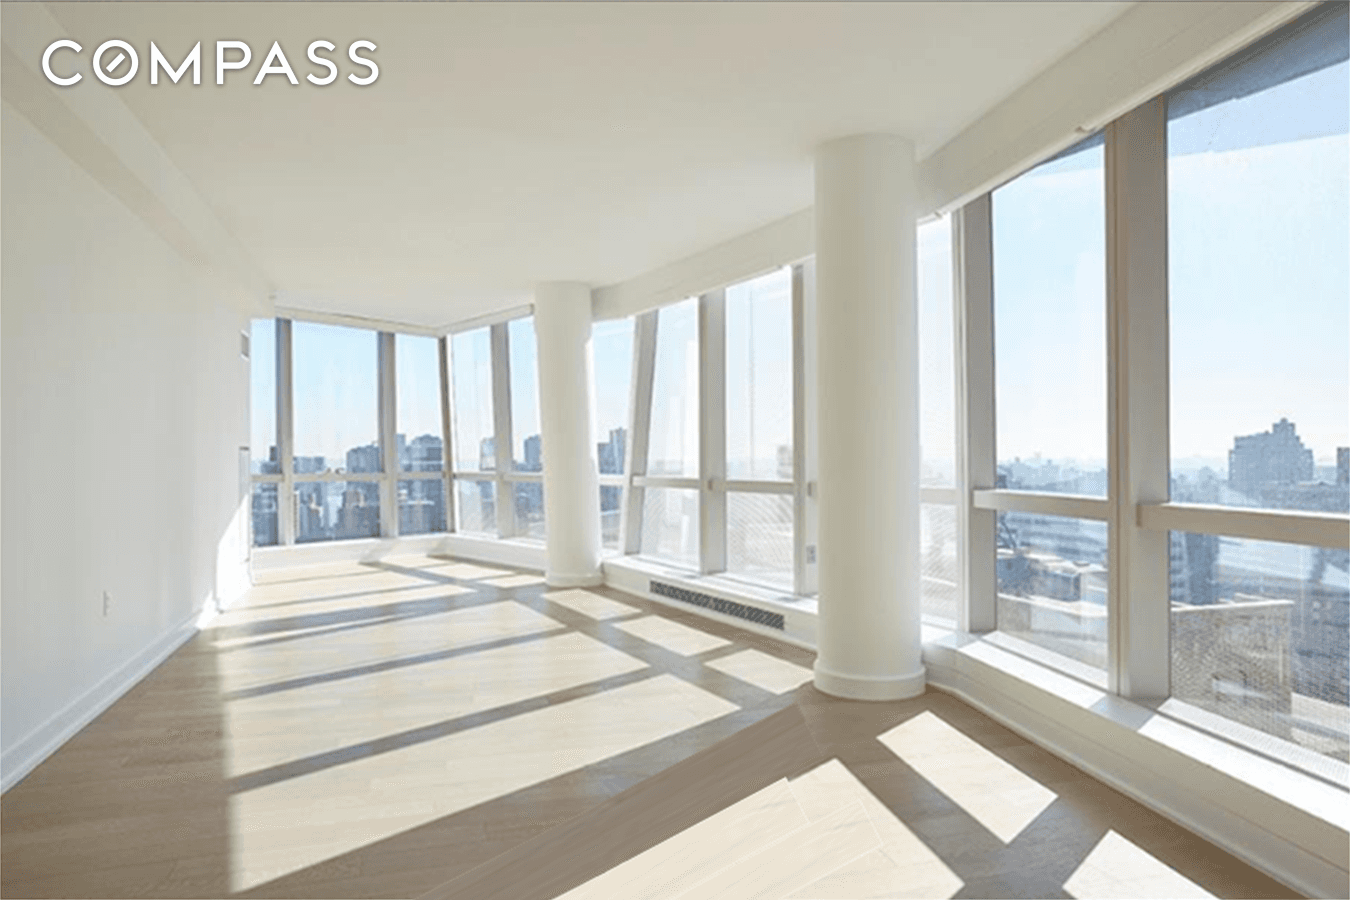 A massive 2 bedroom, 2. 5 bathroom with exposures in three directions, in a brand new condo on Park Avenue South in NoMad.